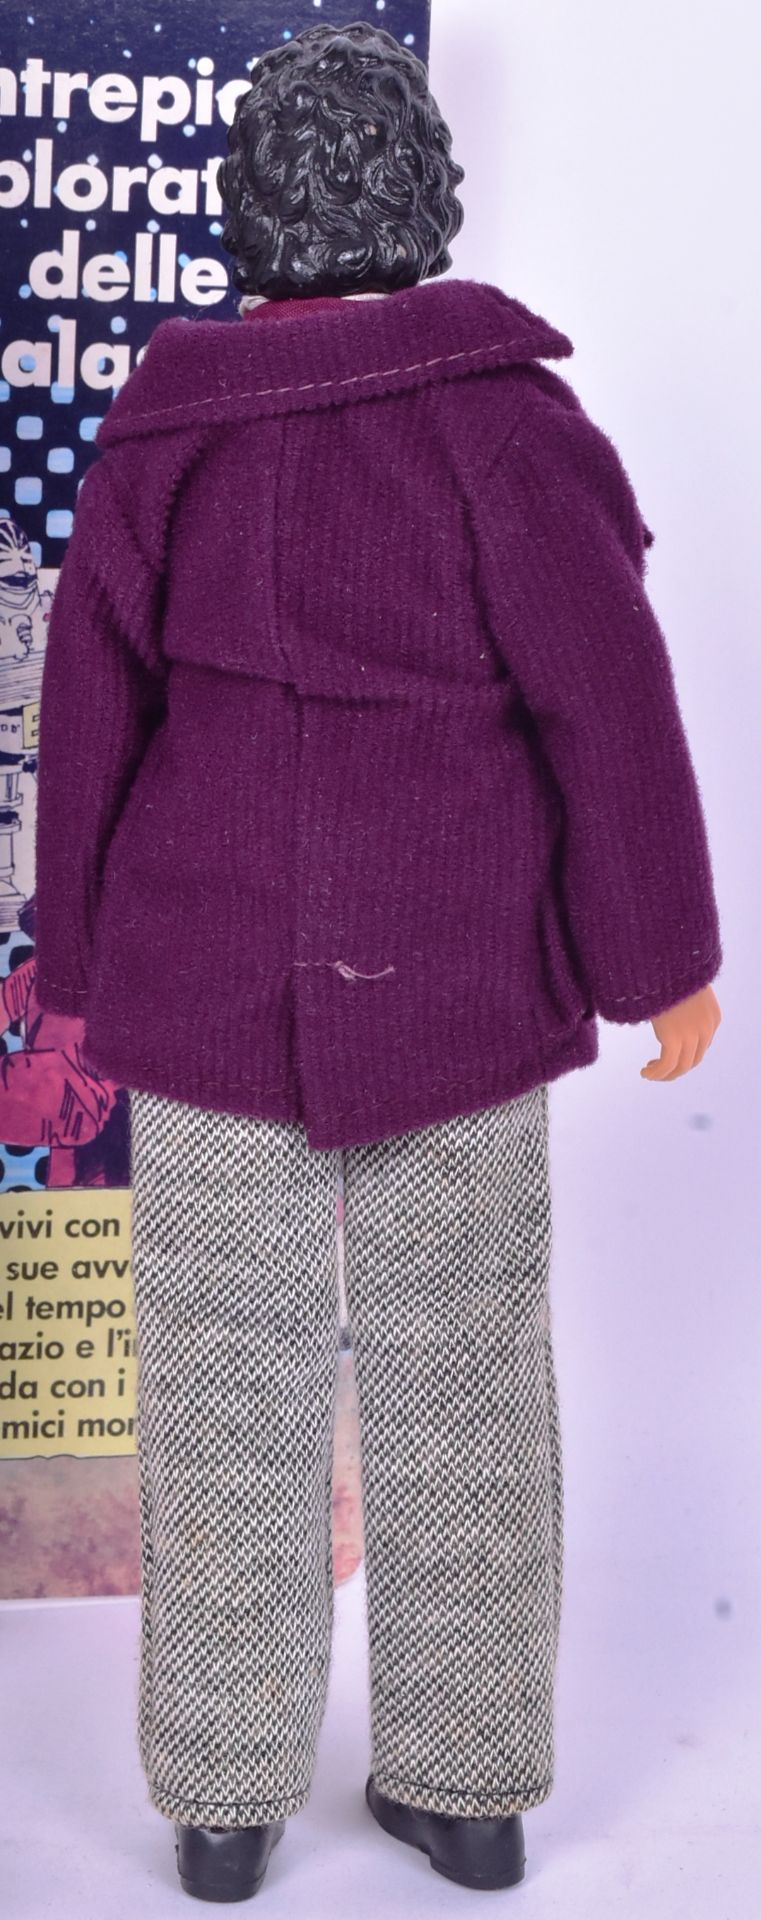 DOCTOR WHO - DENYS FISHER / HARBERT - FOURTH DOCTOR FIGURE - Image 4 of 6